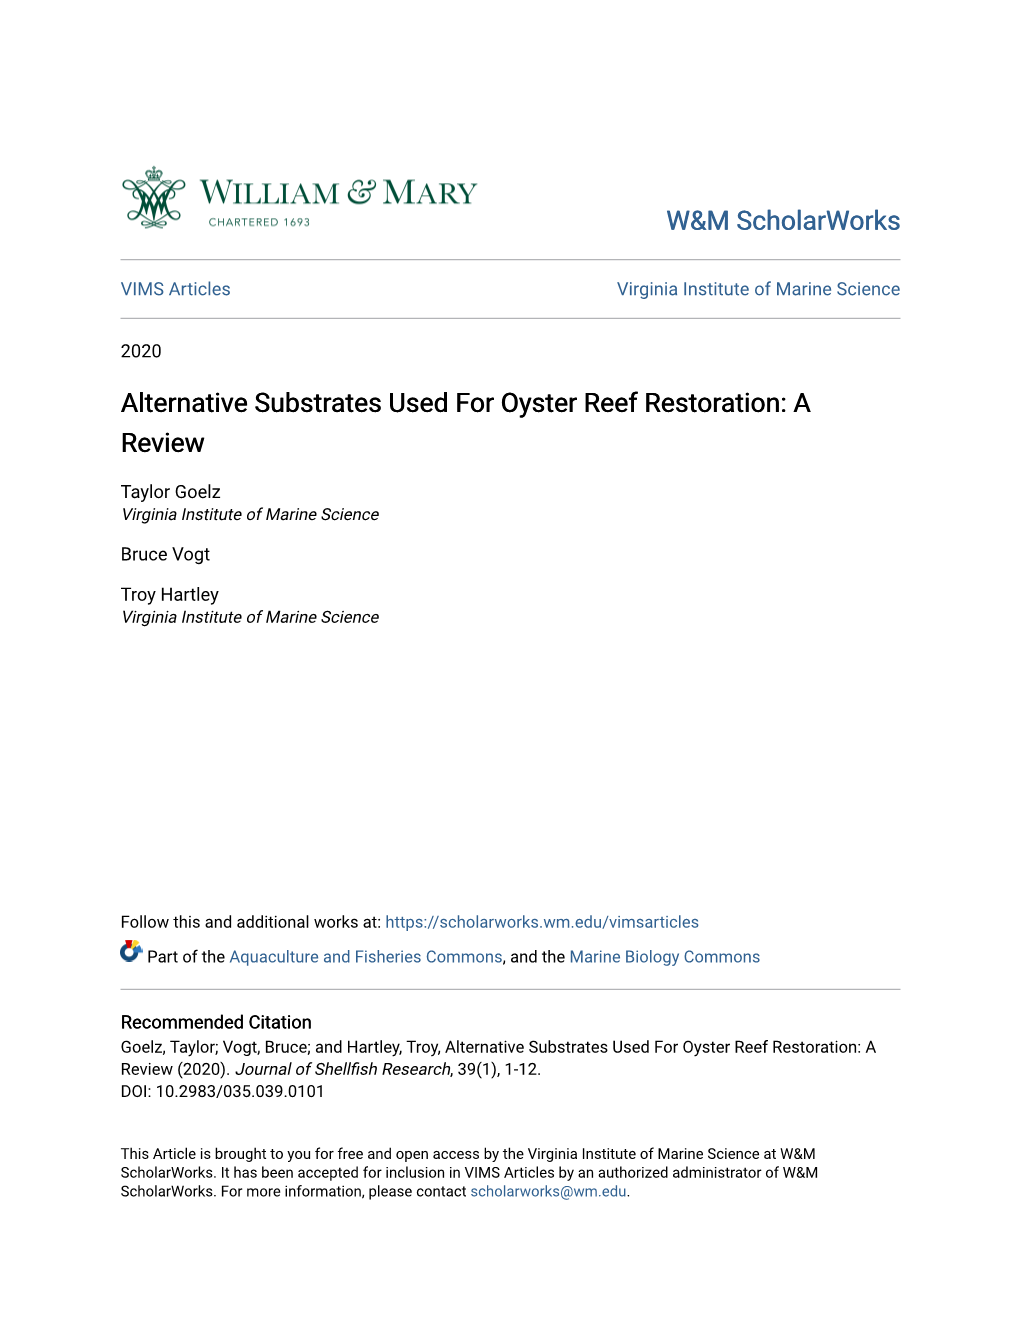 Alternative Substrates Used for Oyster Reef Restoration: a Review